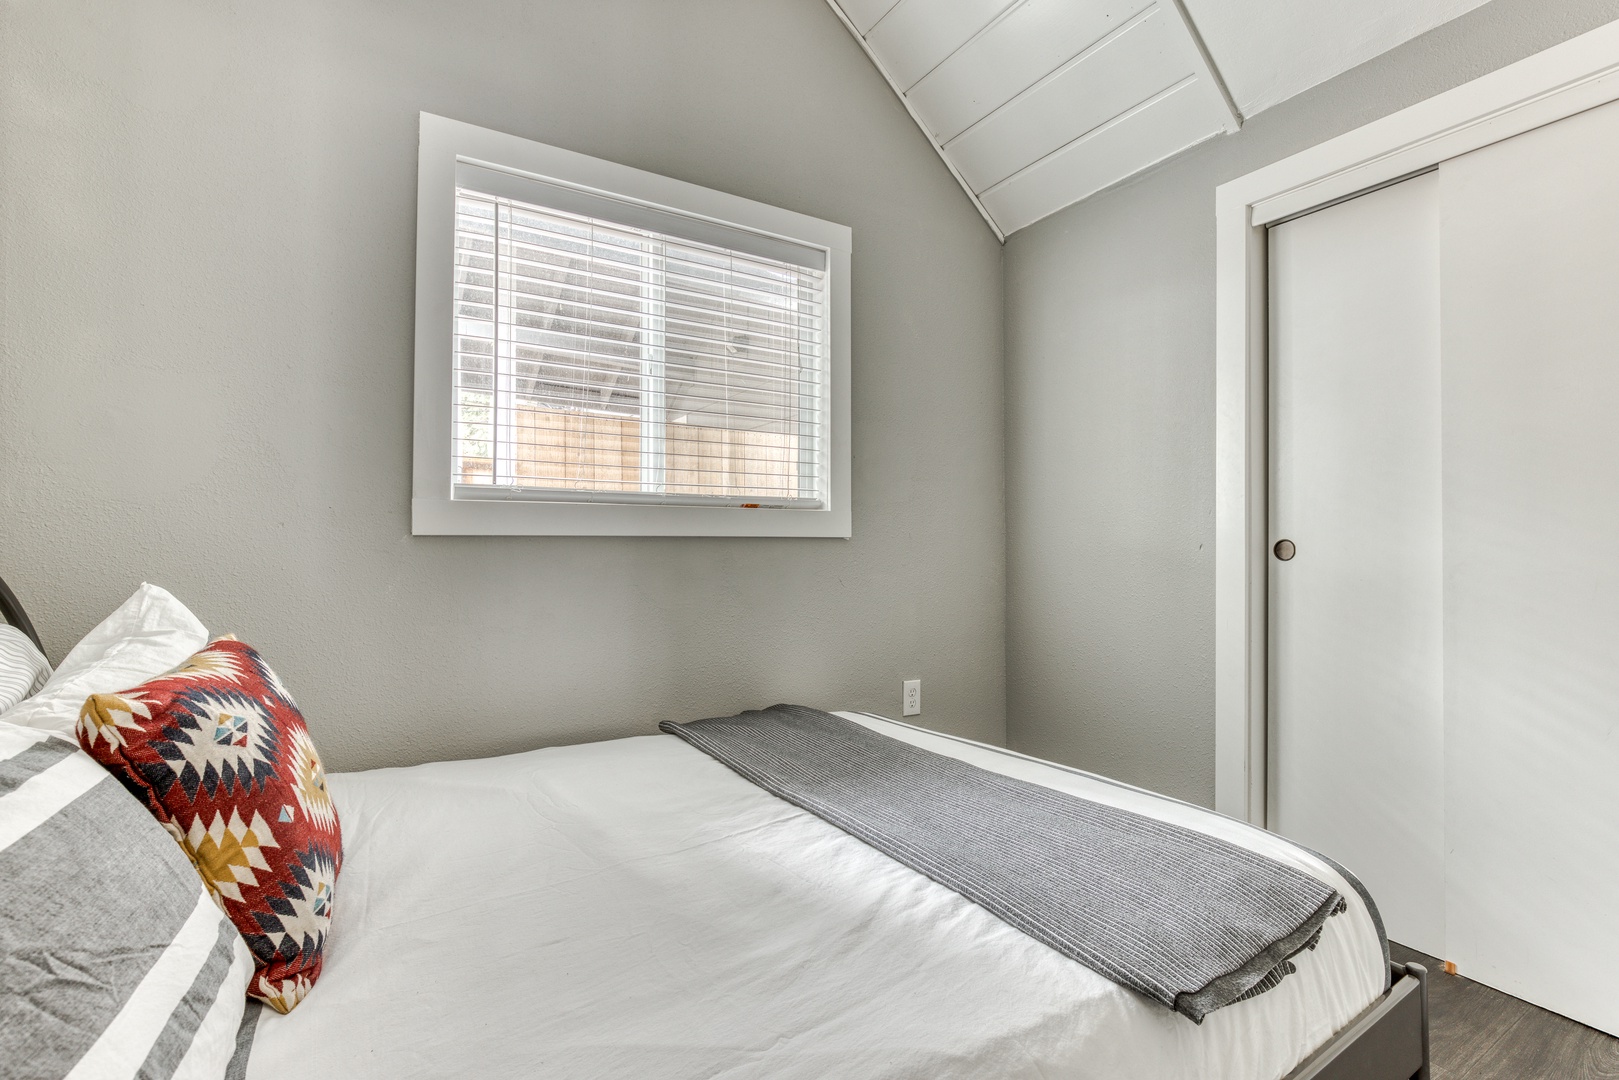 Rhododendron Vacation Rentals, Riverbend Cabin #2 - Rest your day away in this cozy bedroom